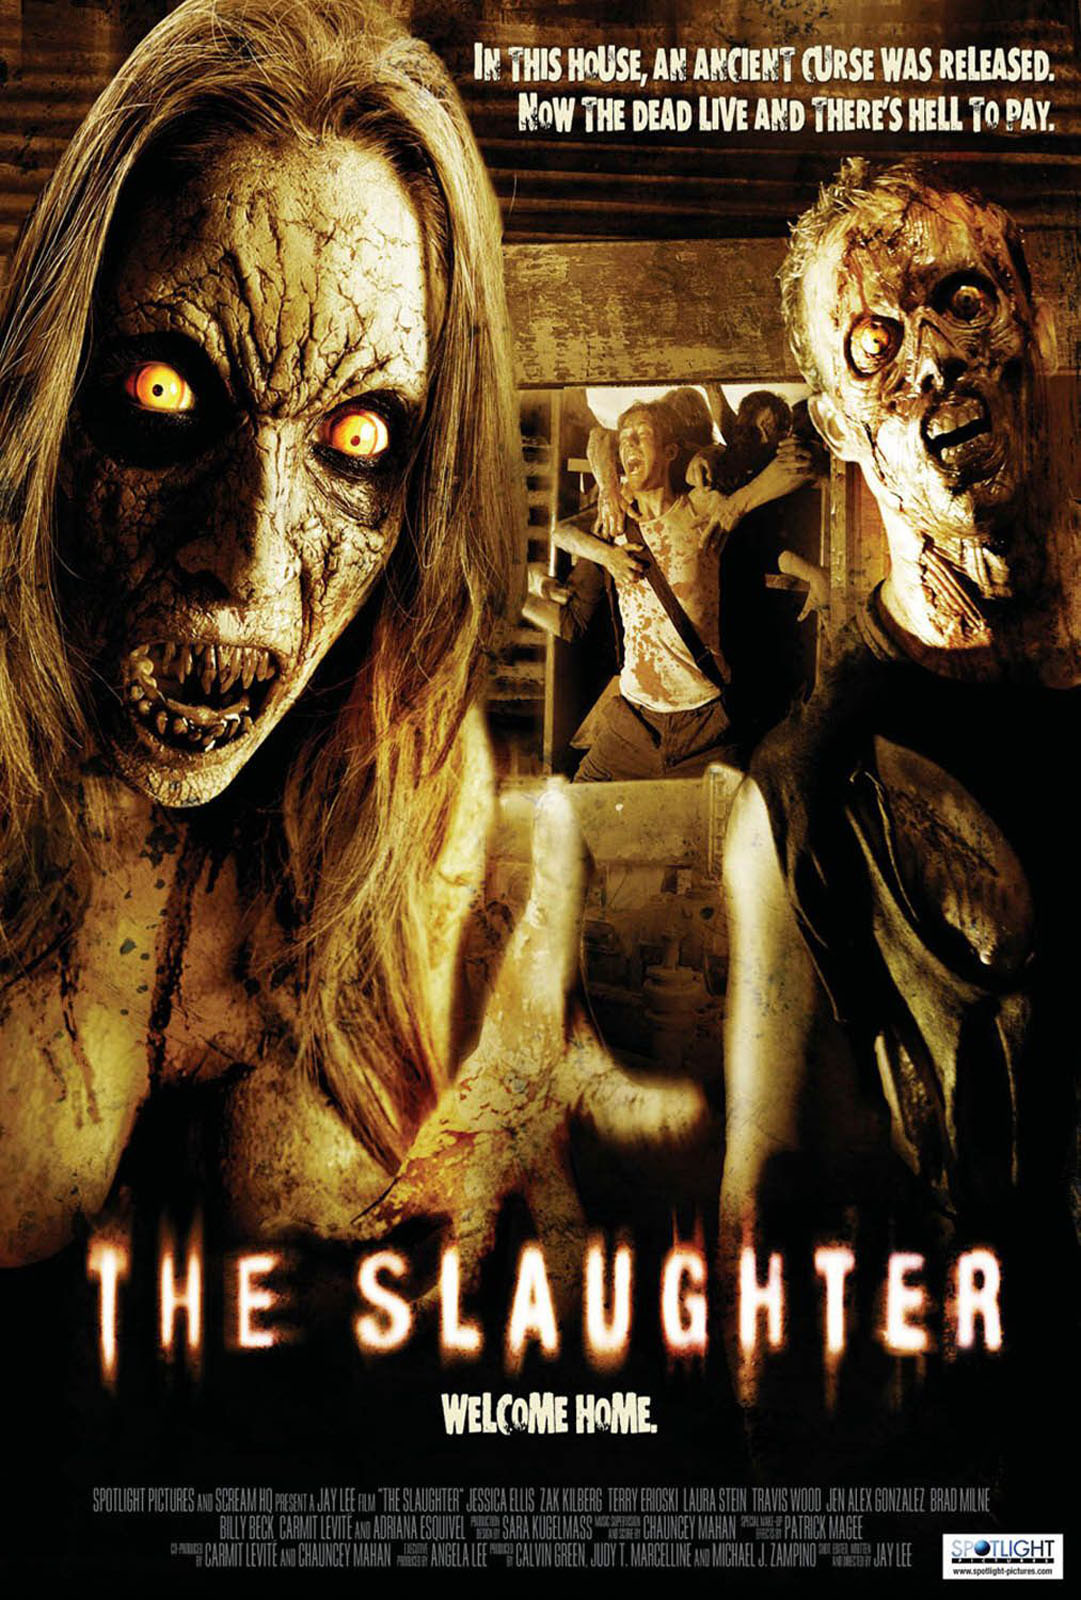 SLAUGHTER, THE